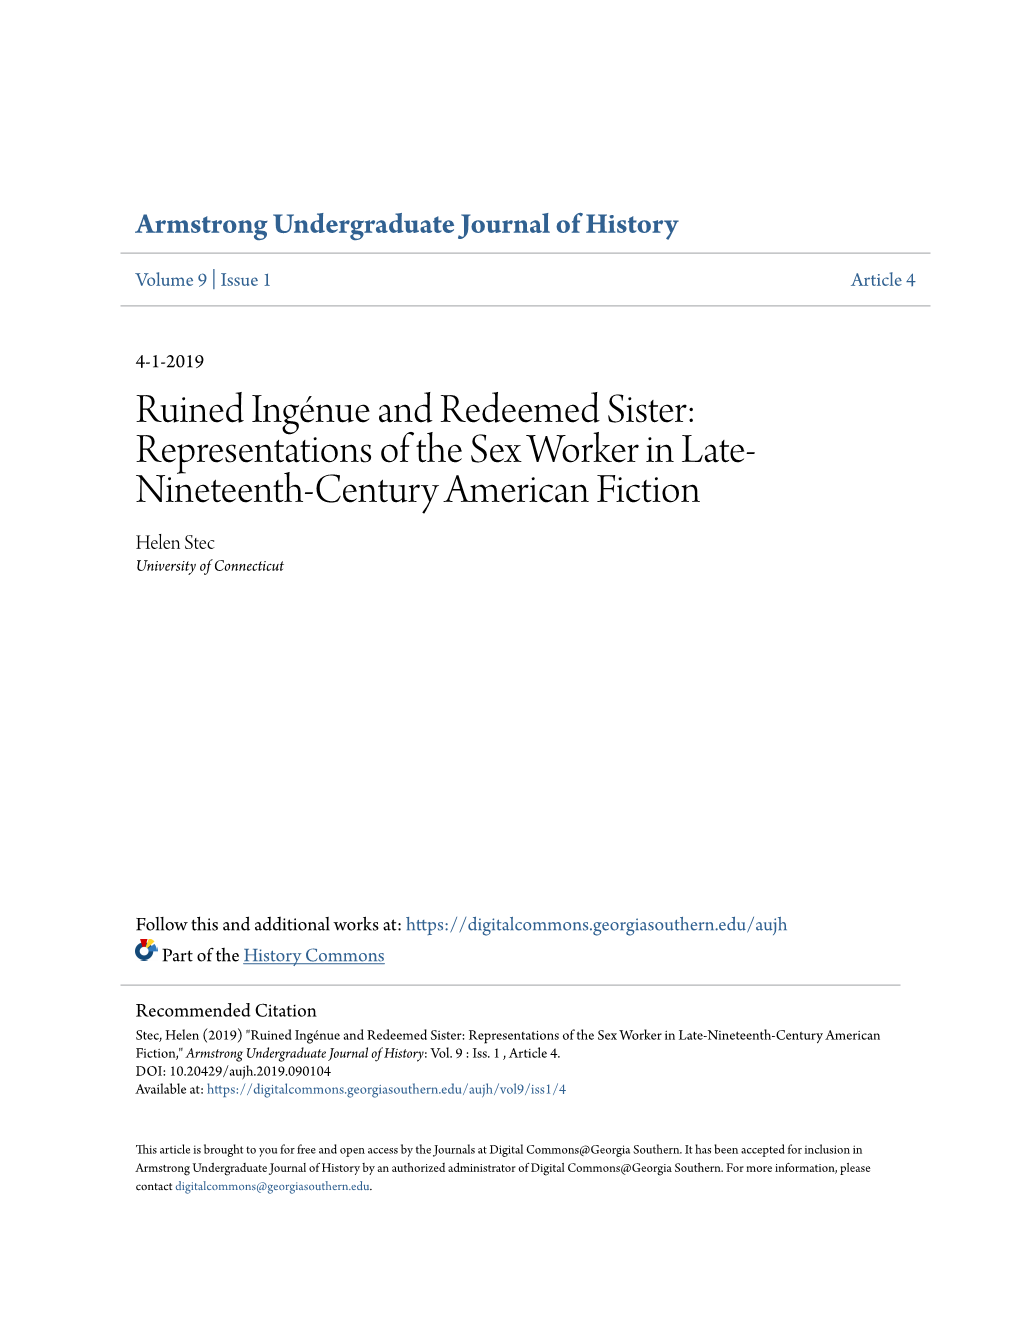 Ruined Ingénue and Redeemed Sister: Representations of the Sex Worker in Late- Nineteenth-Century American Fiction Helen Stec University of Connecticut